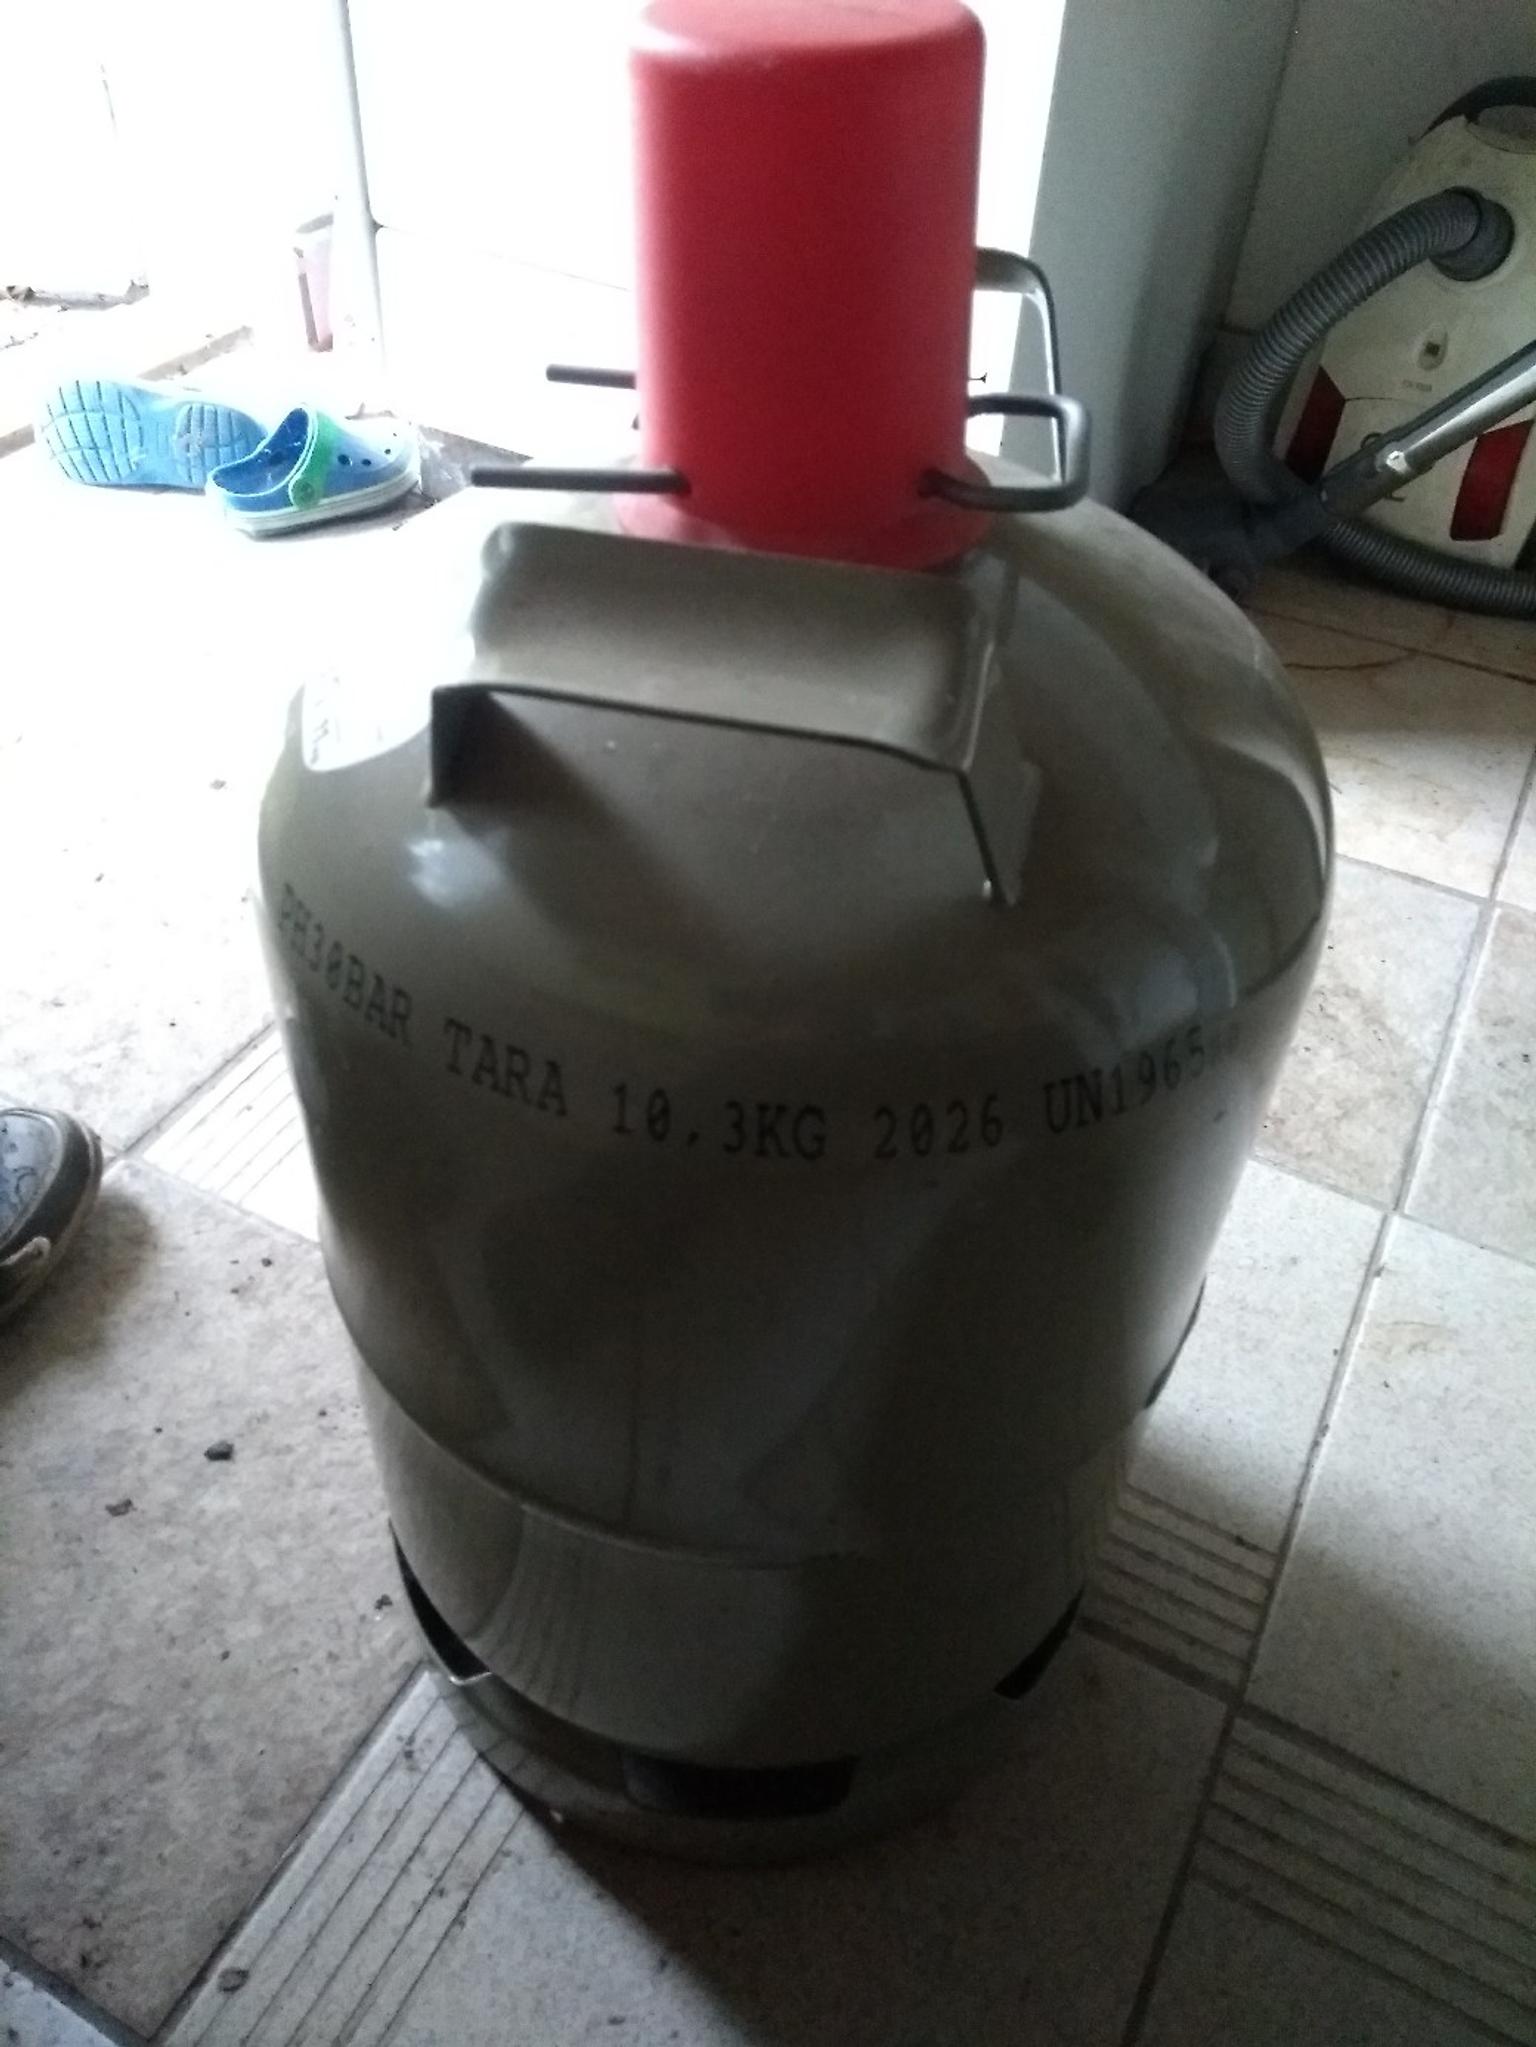 Gas Tank Gebraucht 11 Kg In 76185 Karlsruhe For 30 00 For Sale Shpock